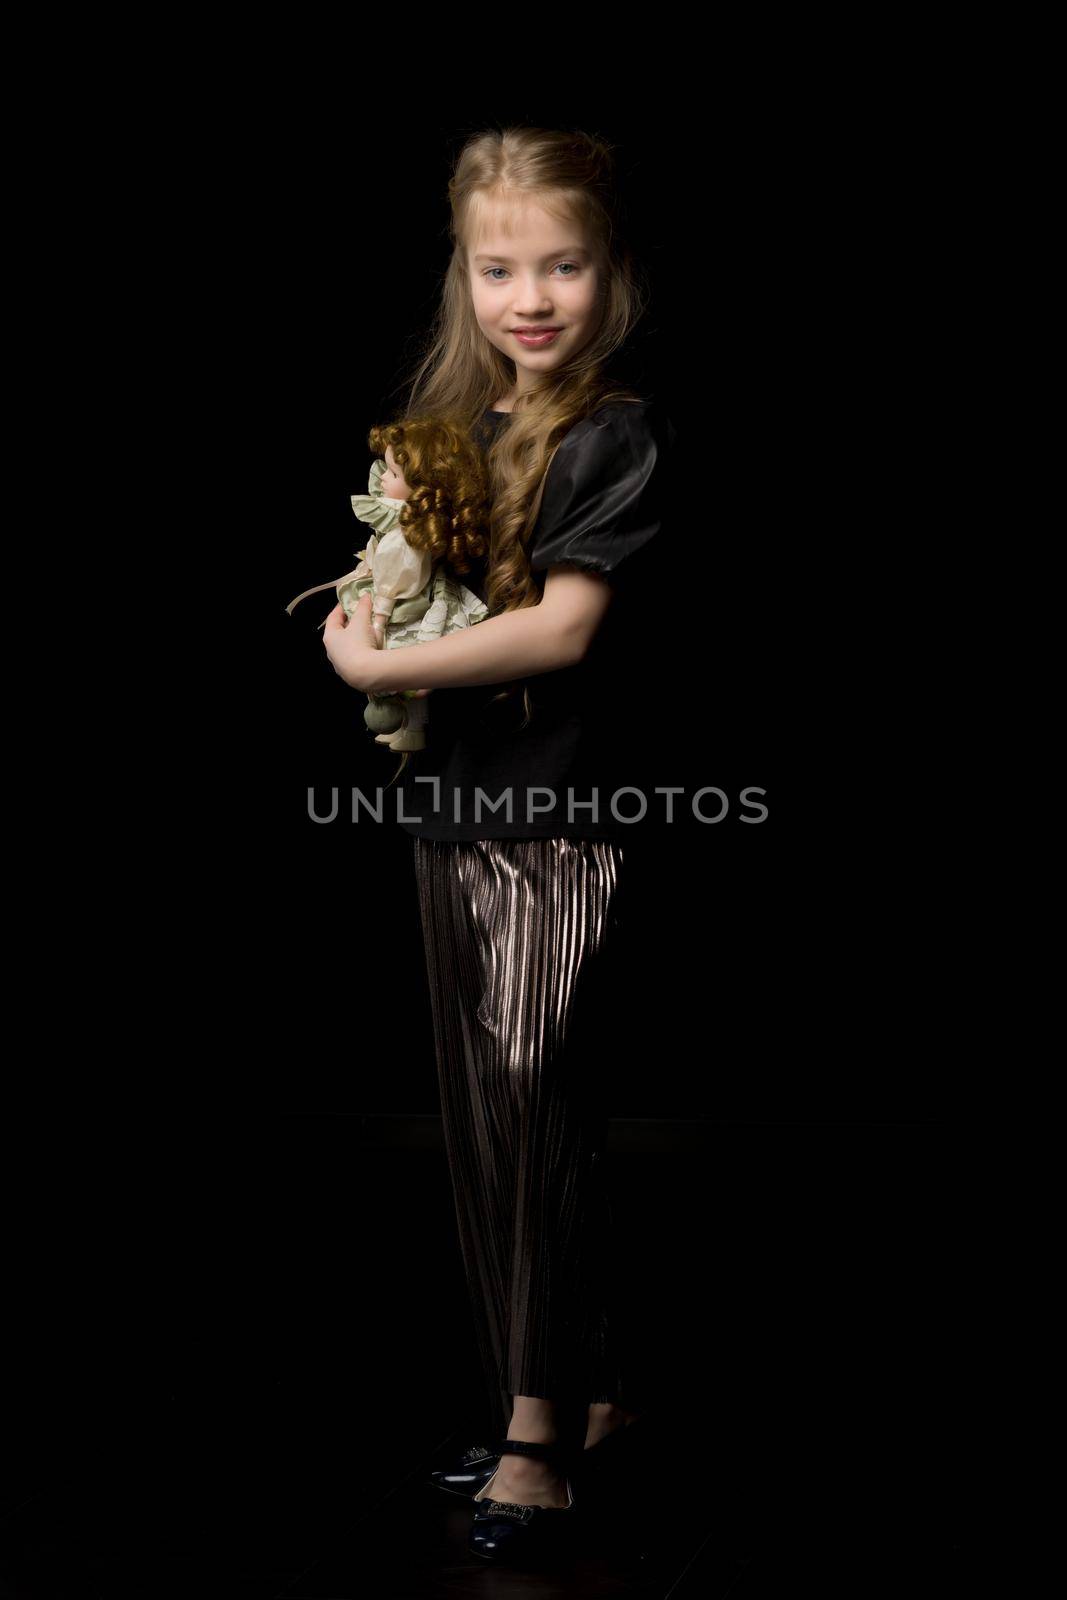 Cute little girl playing with a doll on a black background.